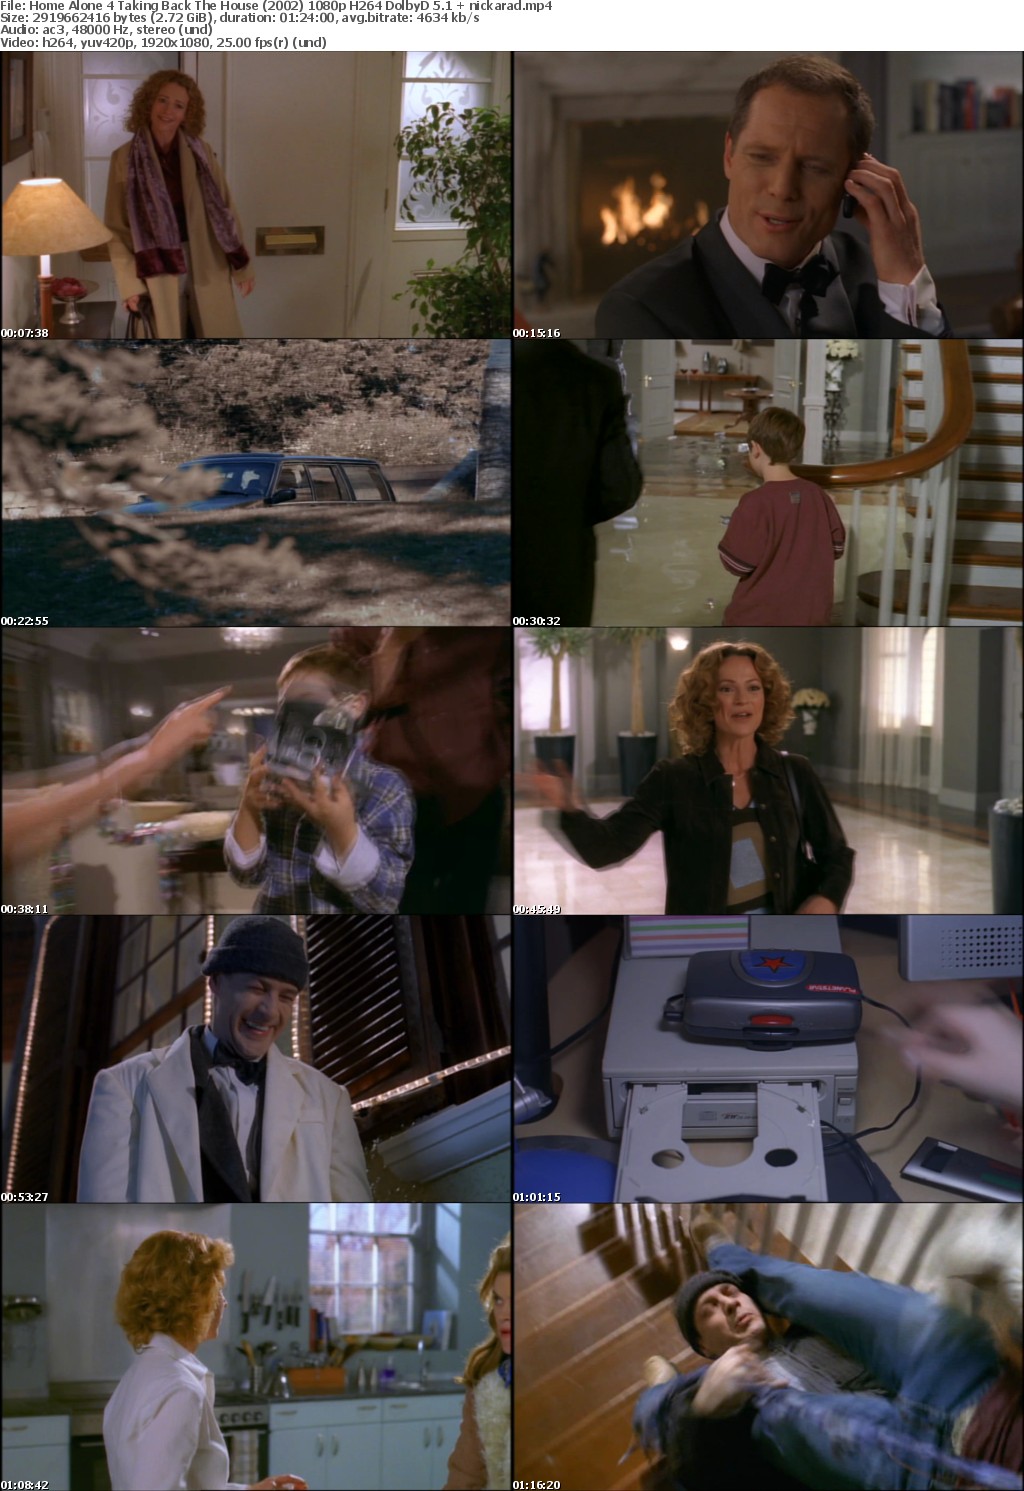 Home Alone 4 Taking Back The House (2002) 1080p H264 DolbyD 5 1 nickarad